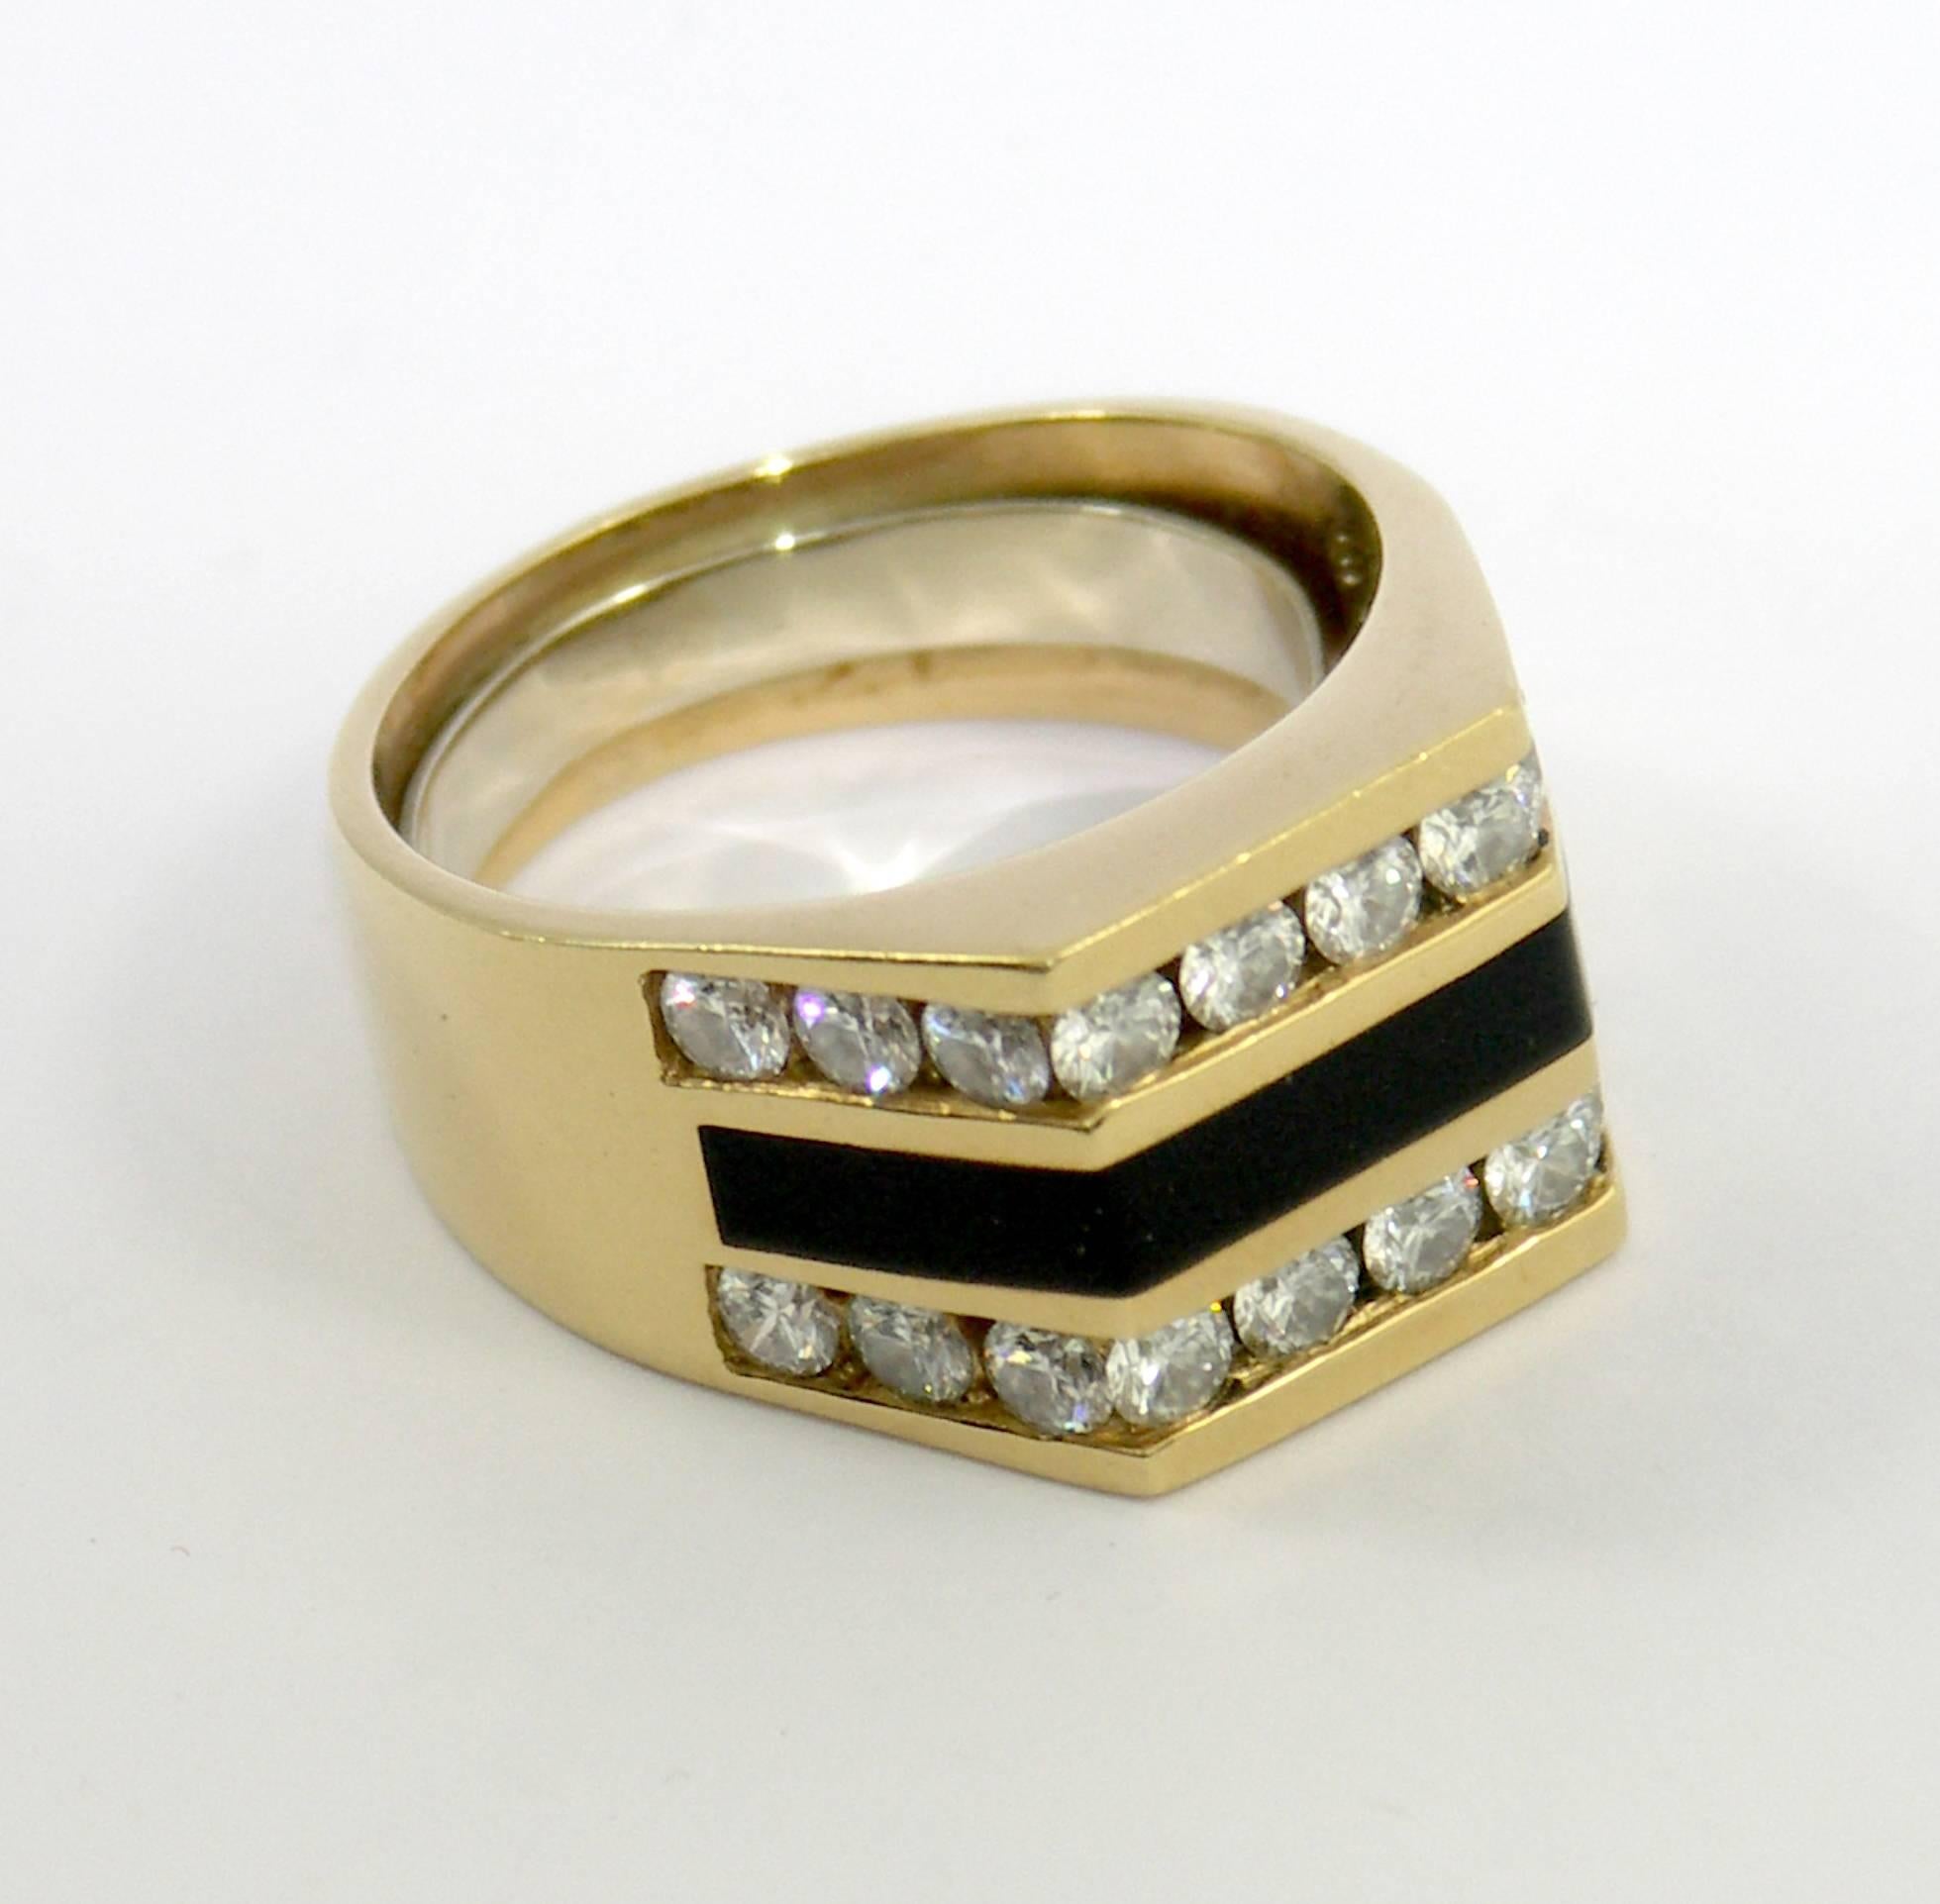 An 18K yellow gold ring with an inlaid black coral center, and two rows of channel set diamonds, weighing 2.25ct total approximate weight. The 22 round brilliant cut diamonds are of F/G color, and VVS2/VS1 clarity. Ring Size 10